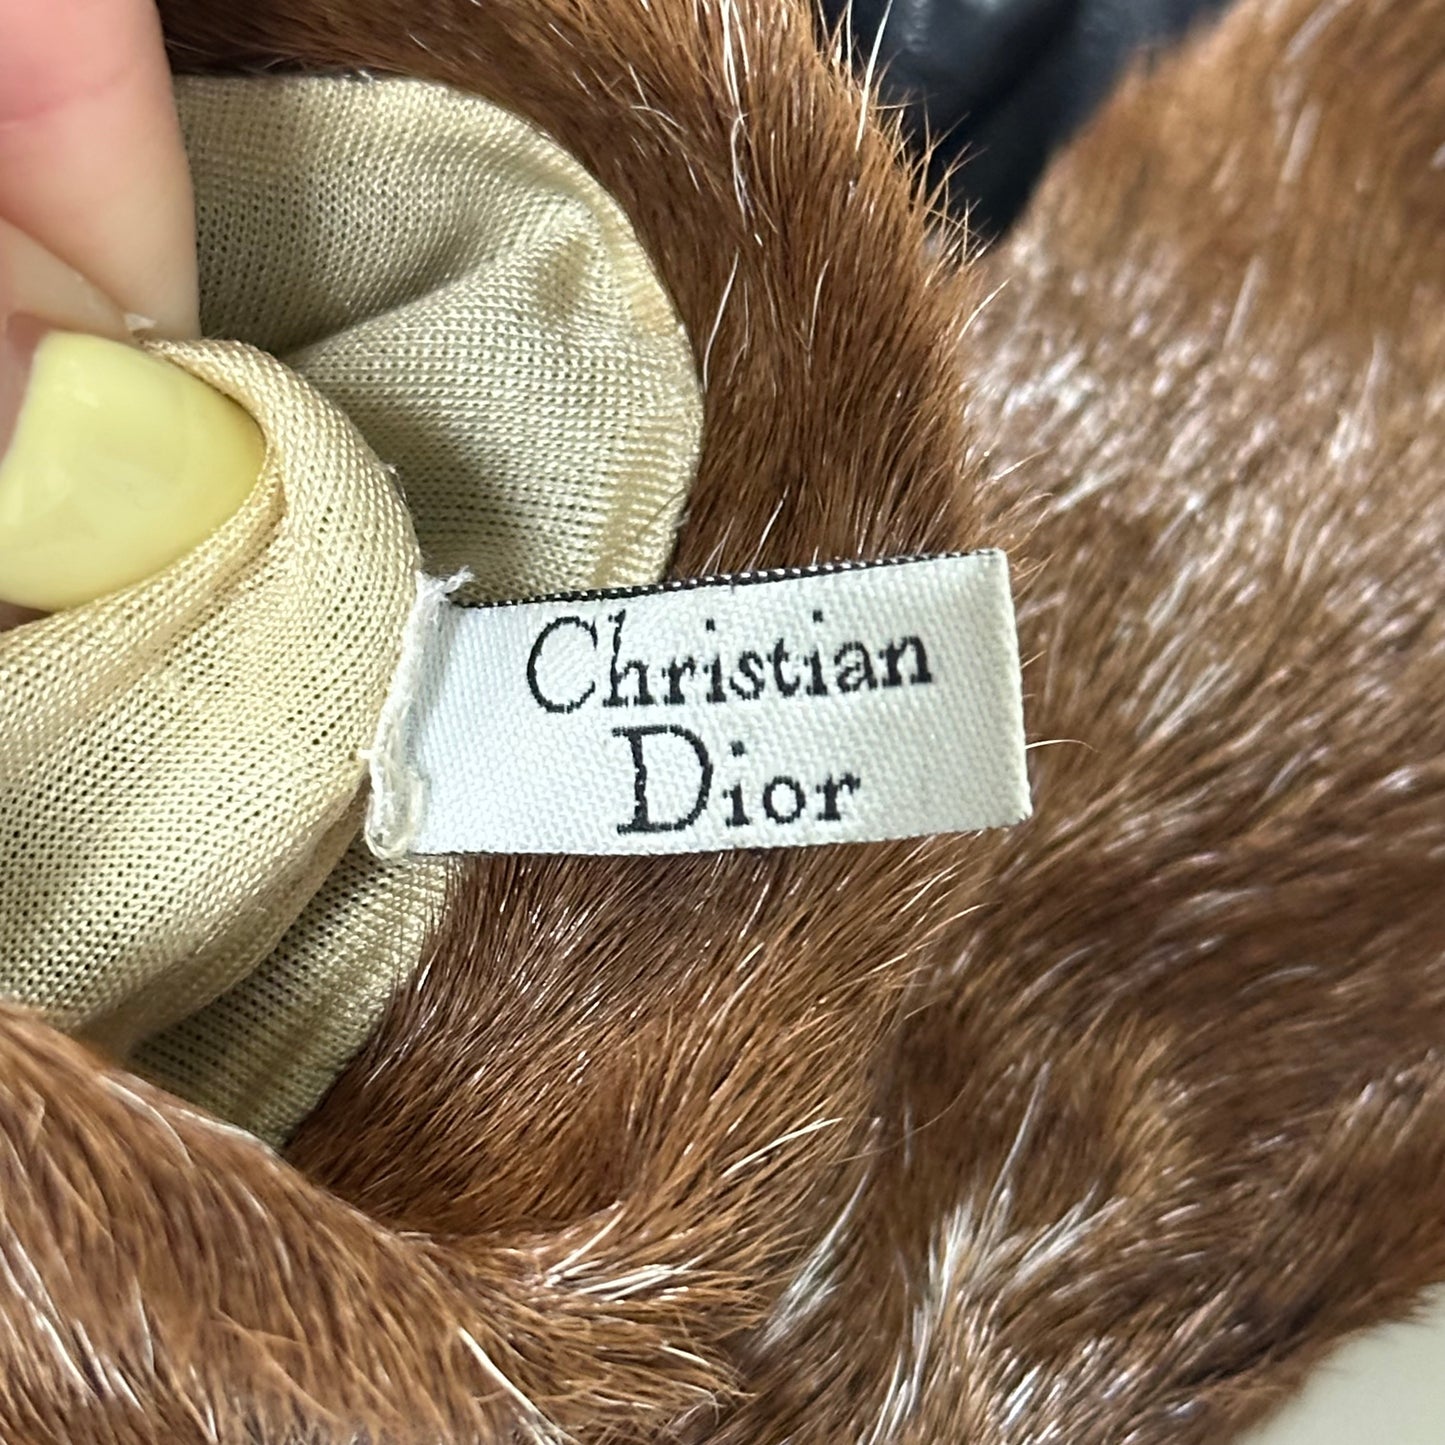 CHRISTIAN DIOR Fur Trim Leather Gloves with Lock and Key Charm